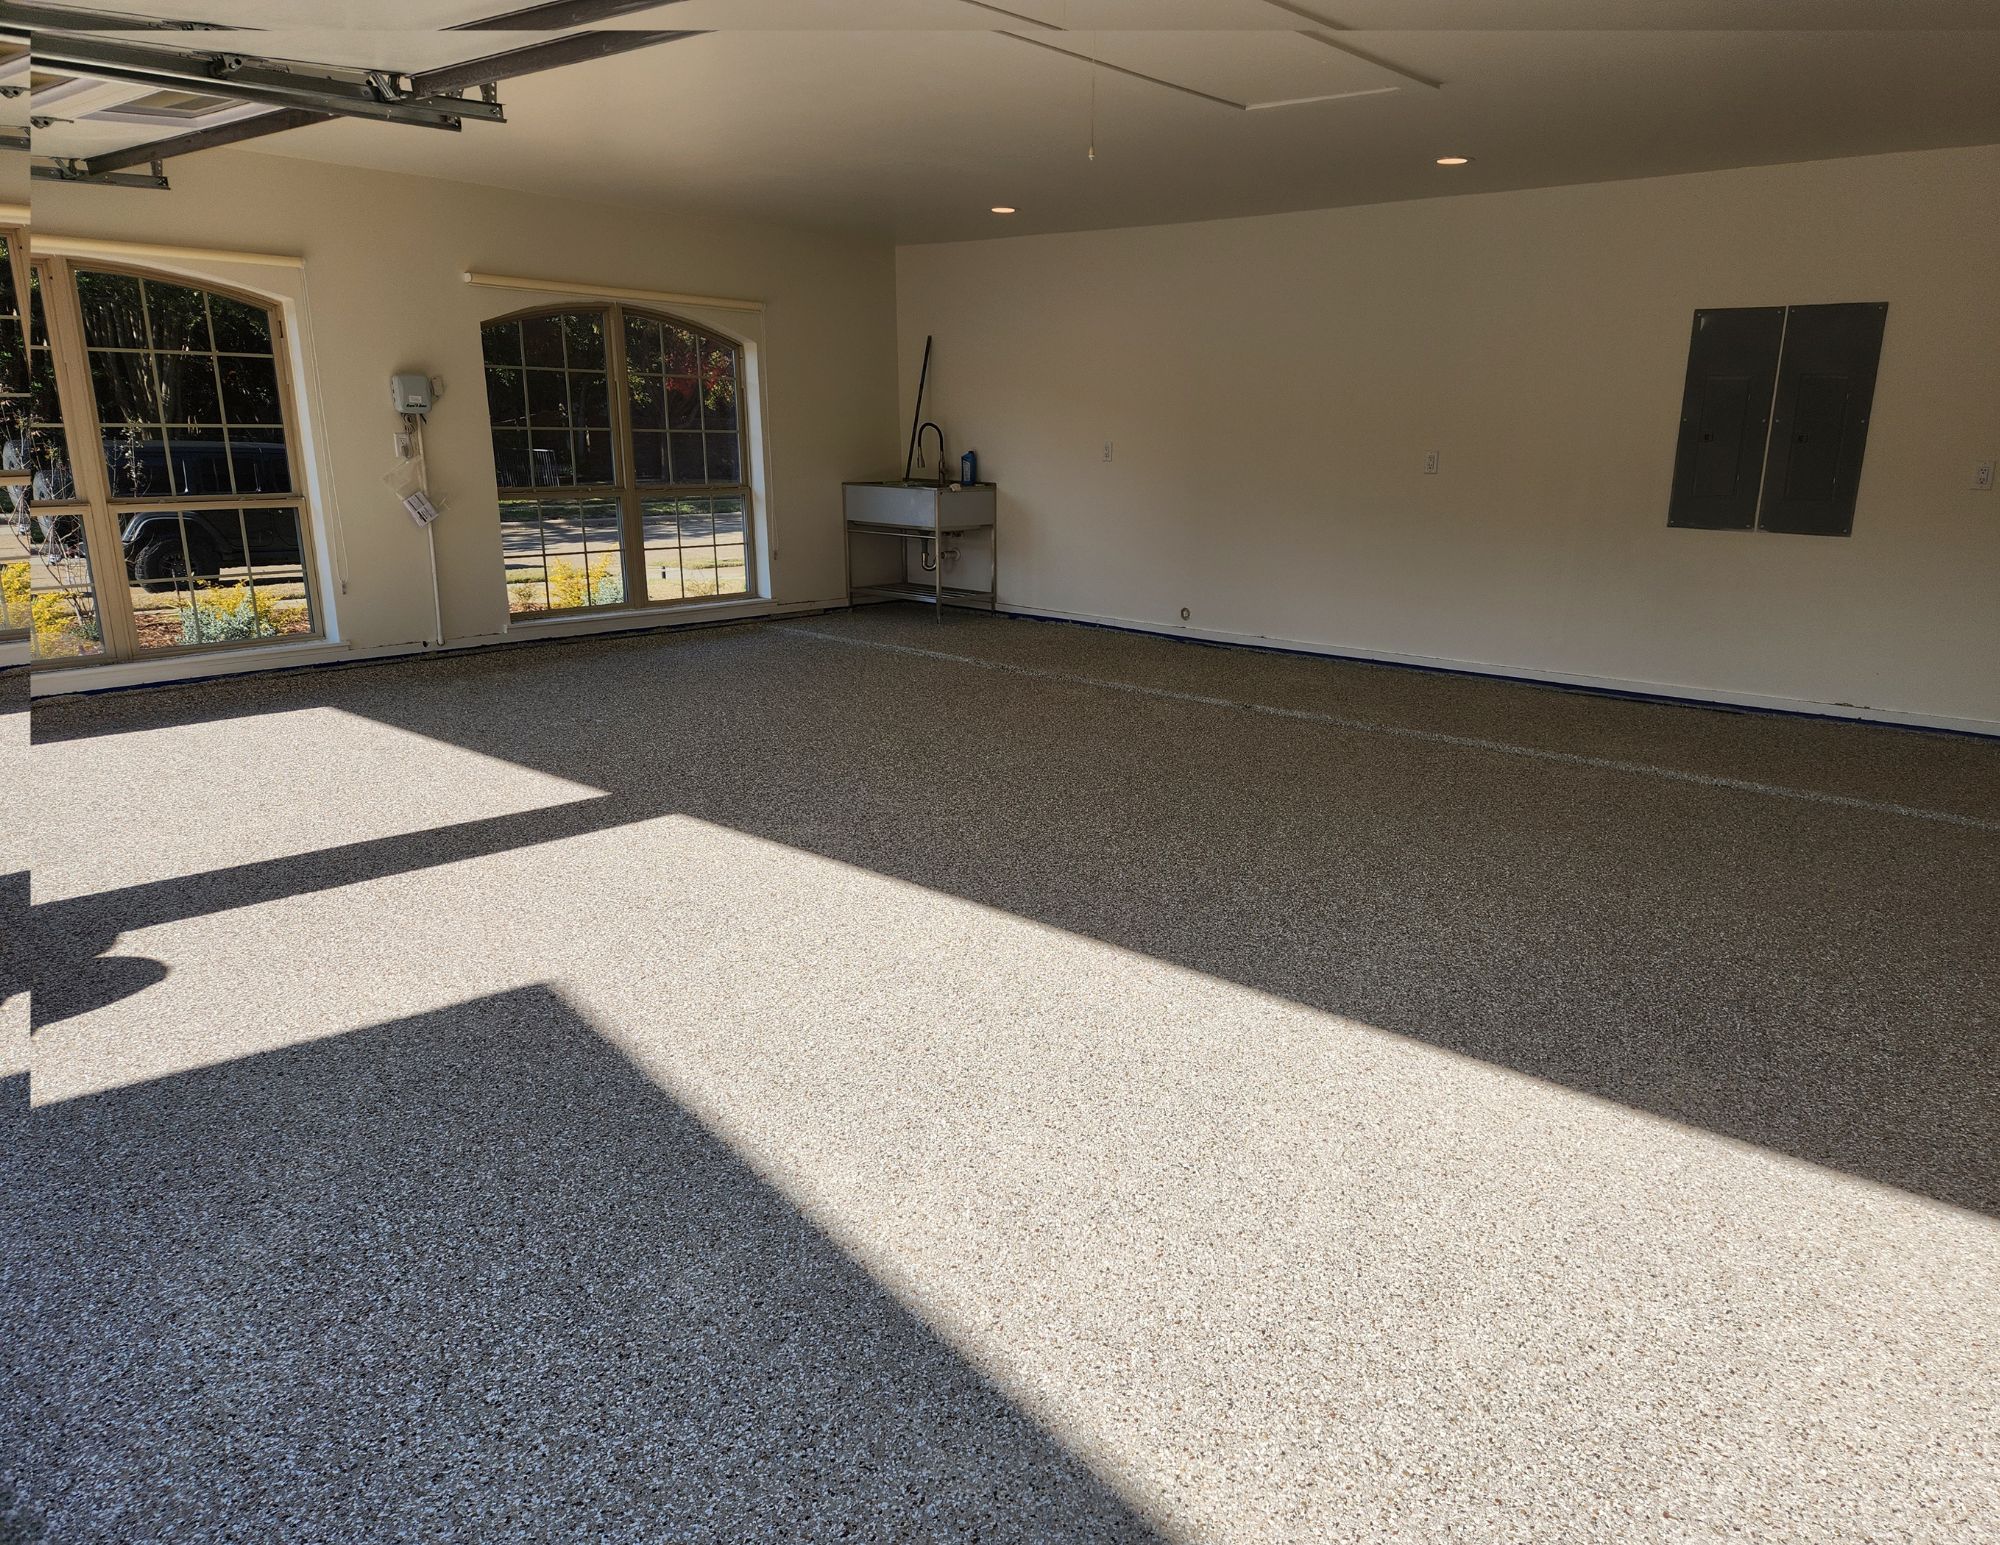 a Garage with a Newly Applied Polyaspartic Floor Coating by Mygaragefloors.com, Featuring a Seamless and Durable Finish. - Completed Garage Floor Coating